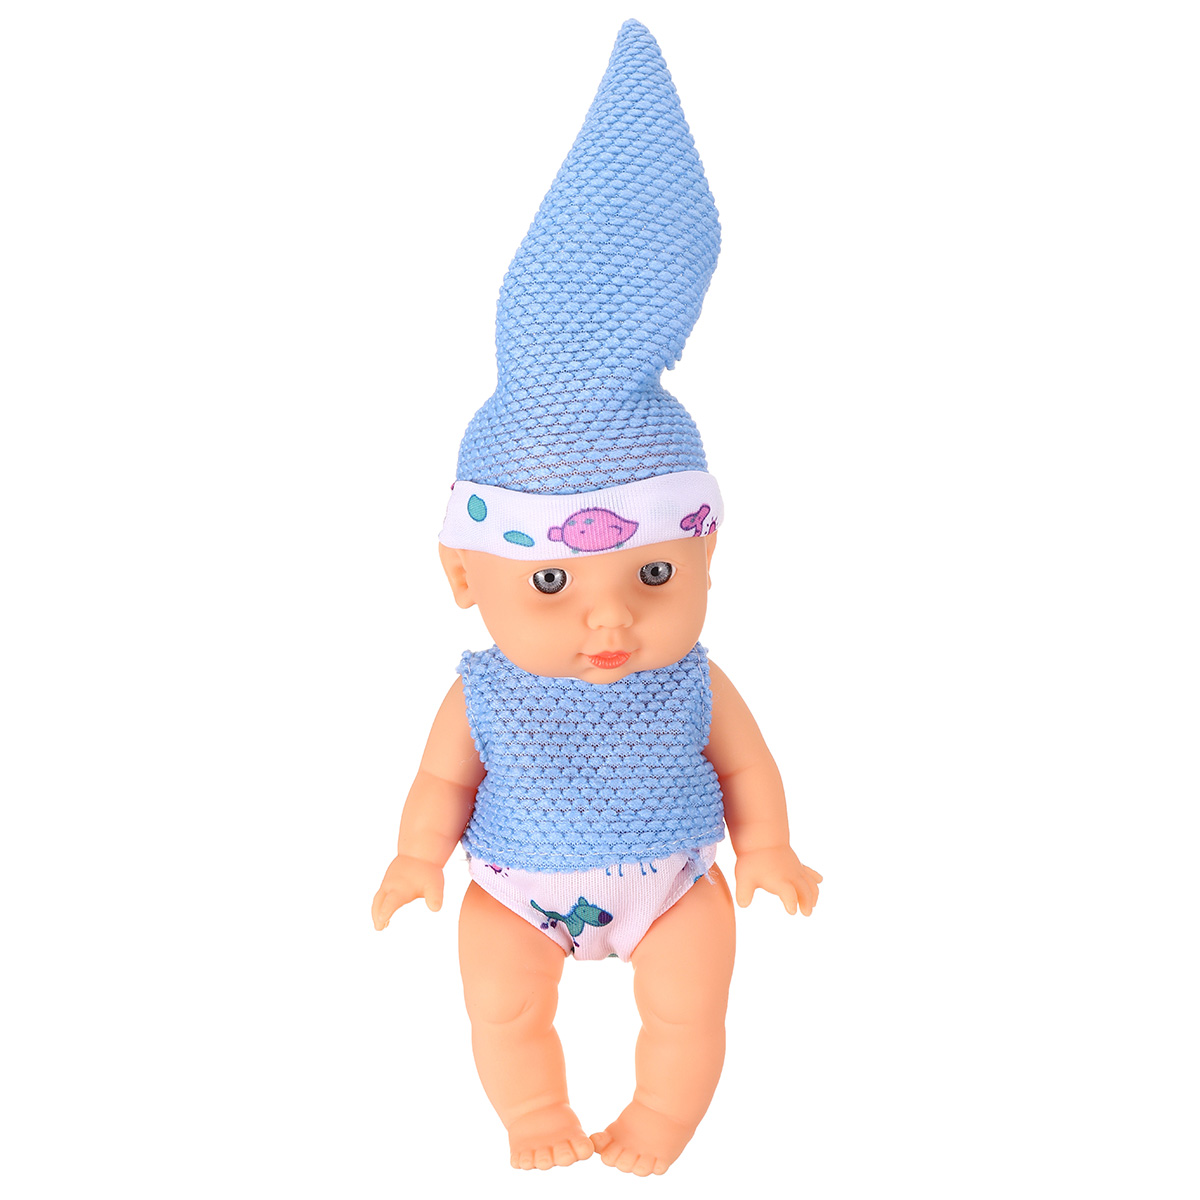 Simulation-Baby-3D-Creative-Cute-Doll-Play-House-Toy-Doll-Vinyl-Doll-Gift-1818656-8